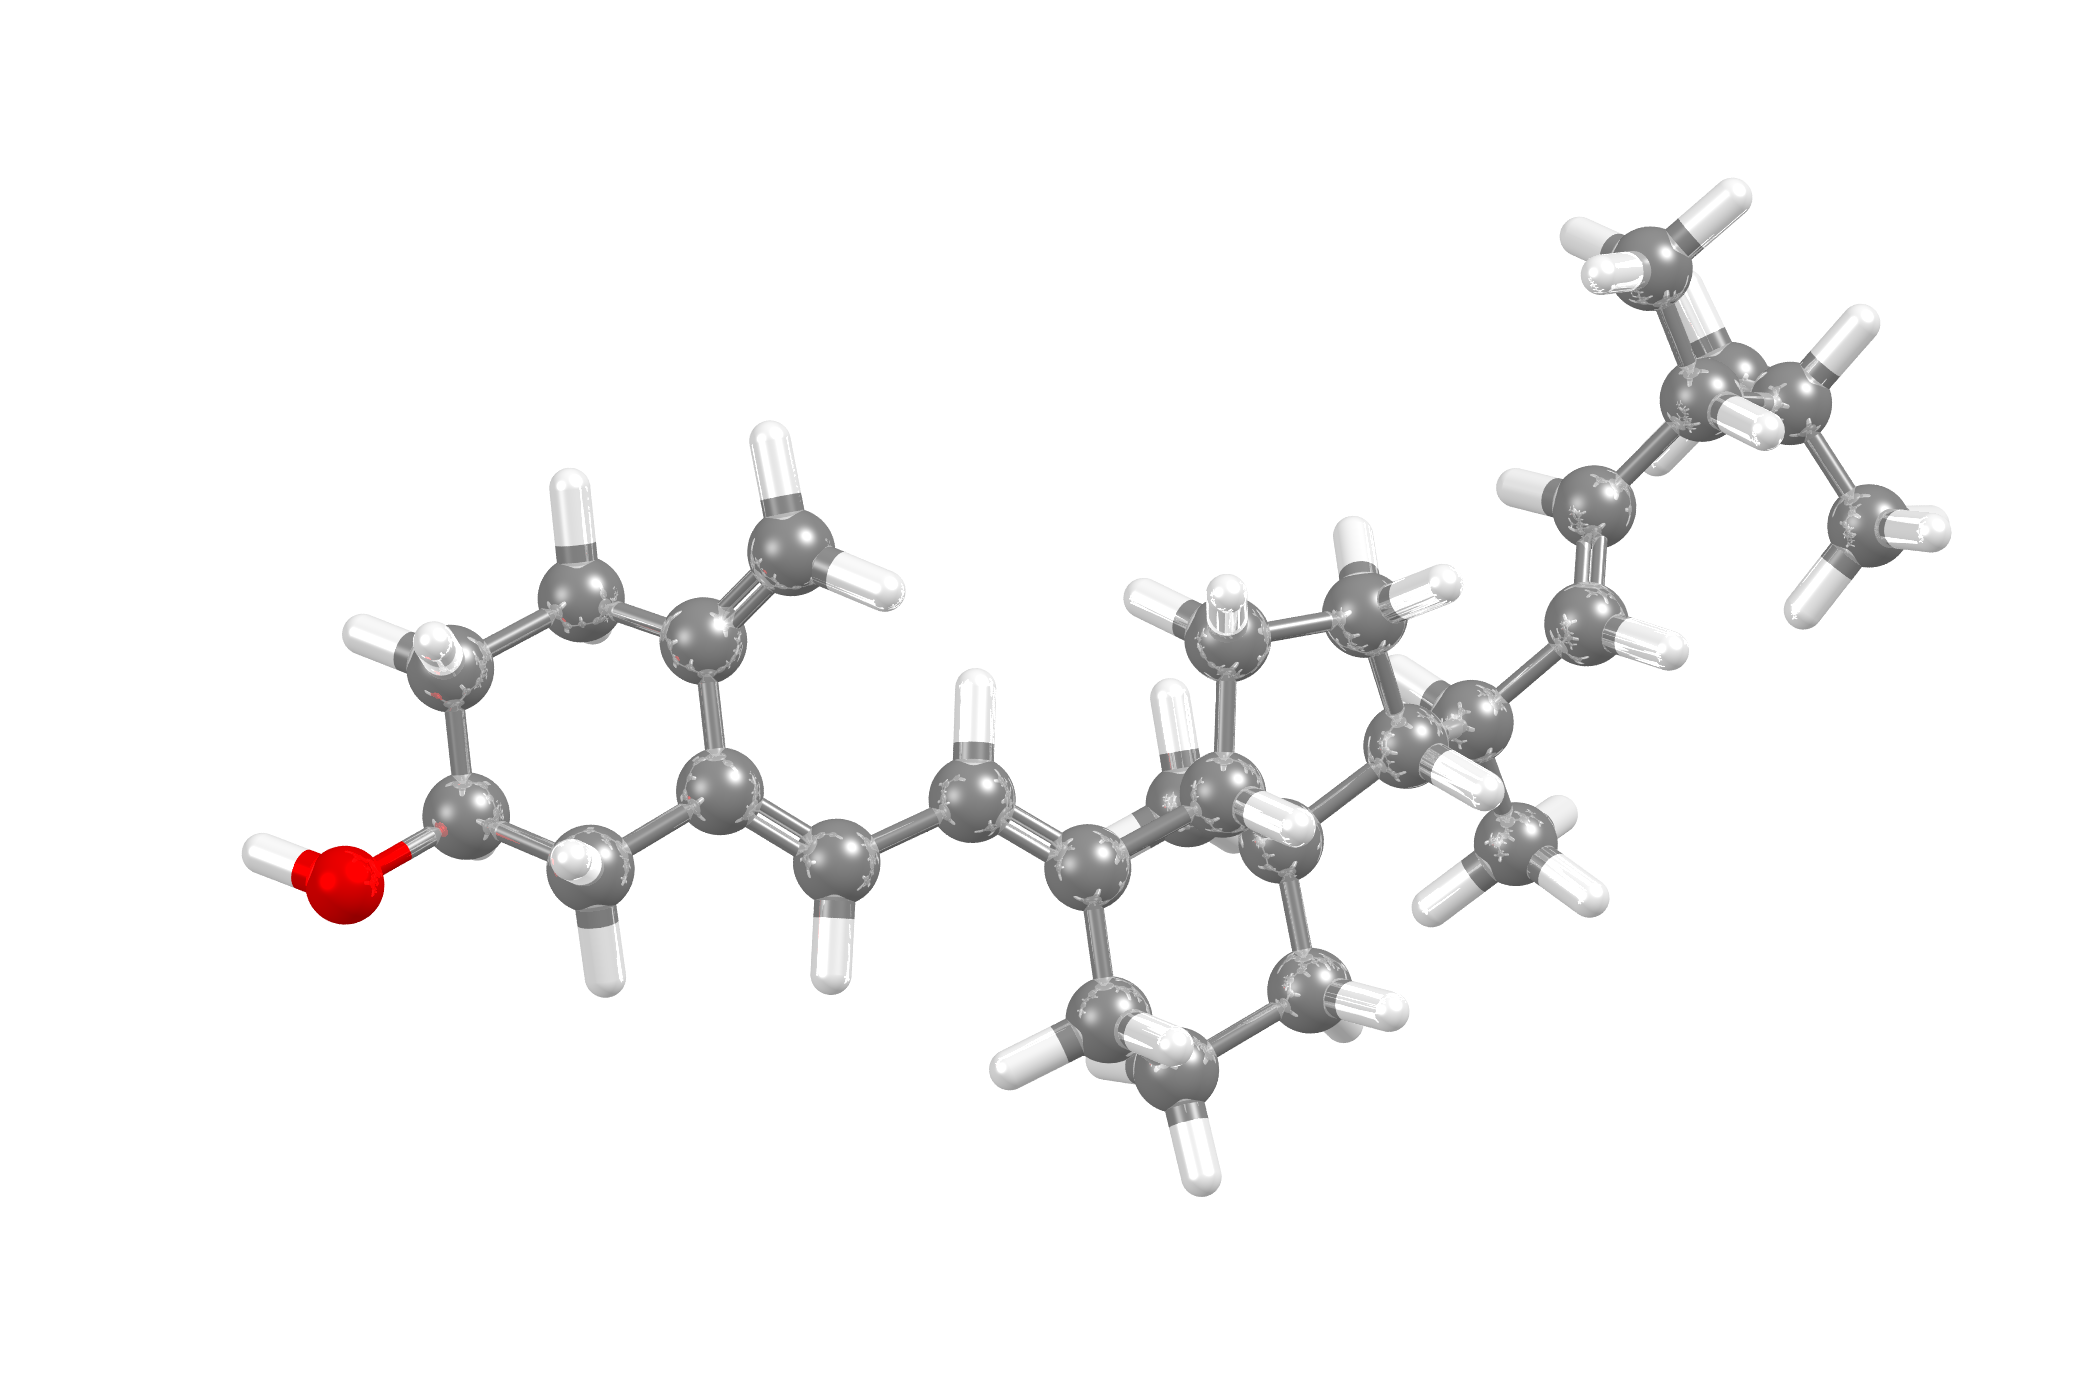 Vitamin D2 structure from the CSD